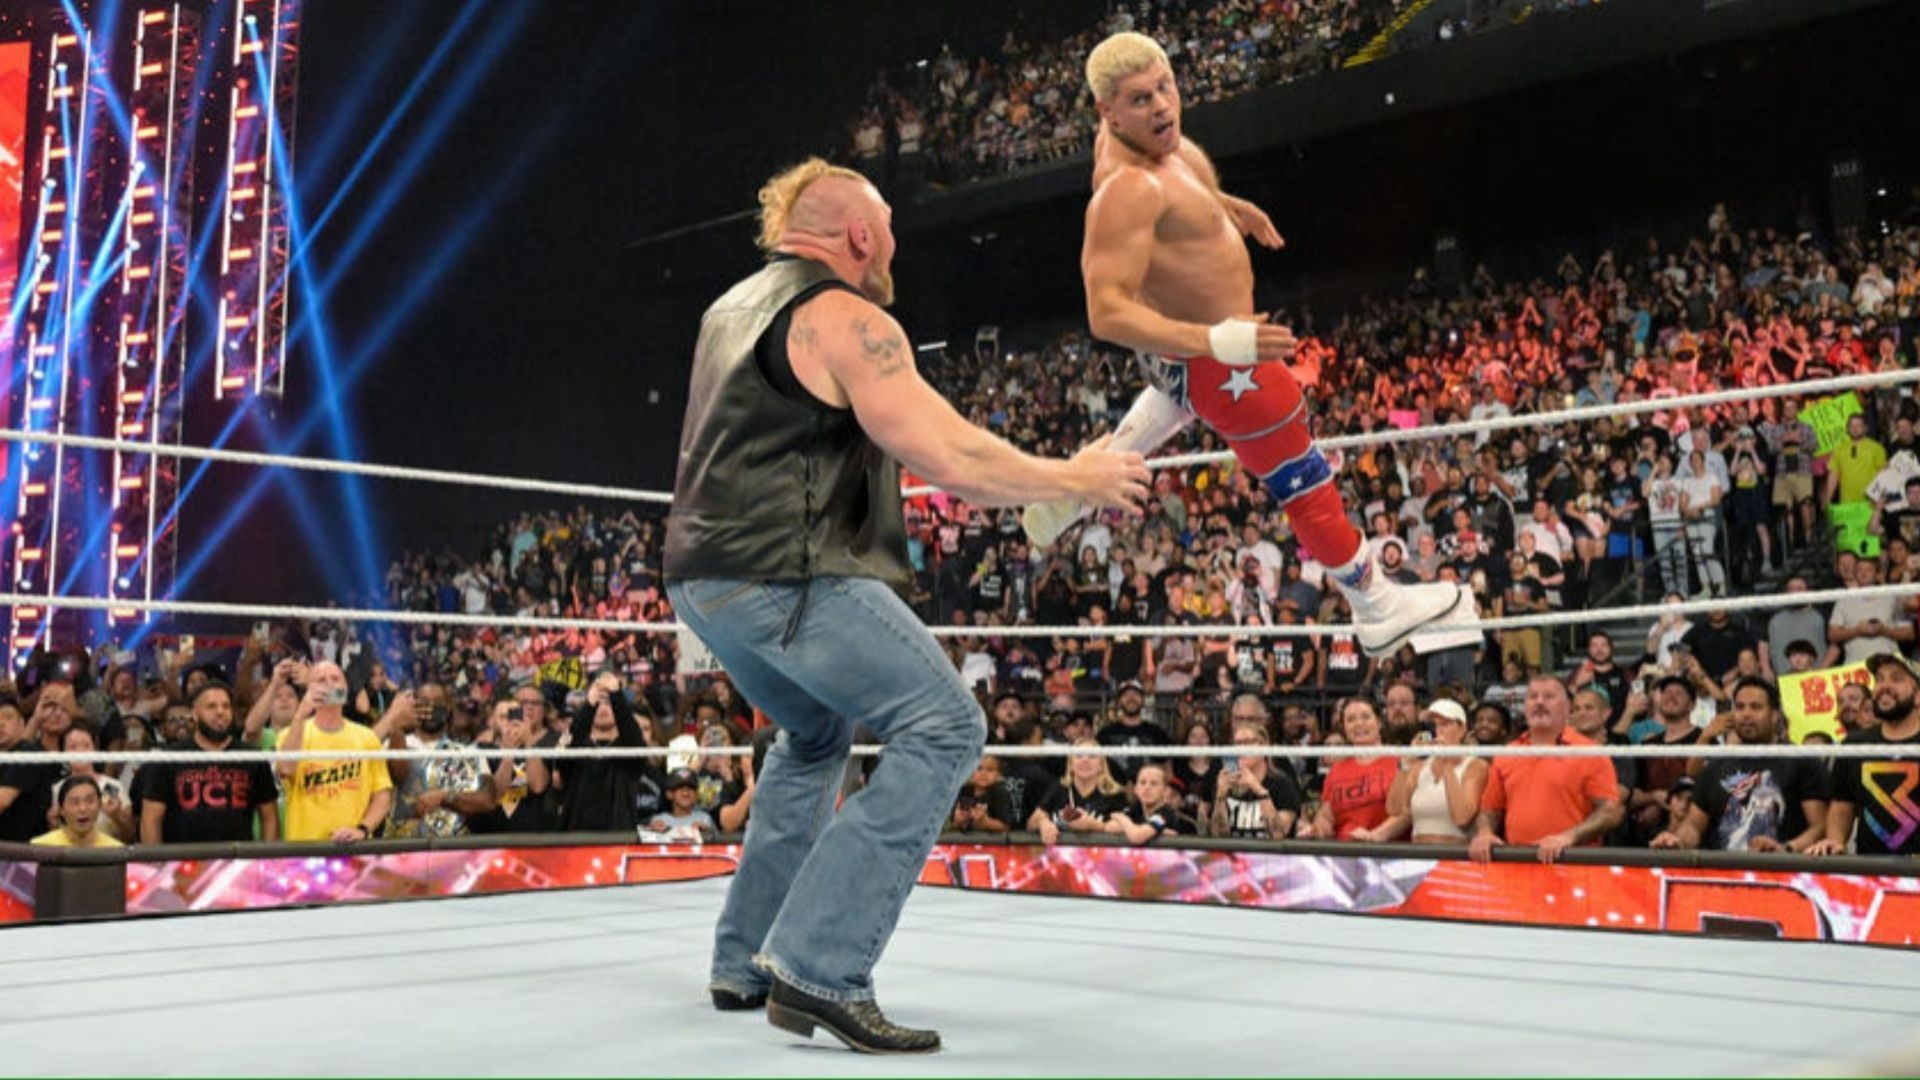 Cody Rhodes attempts his signature Cody Cutter on Brock Lesnar.